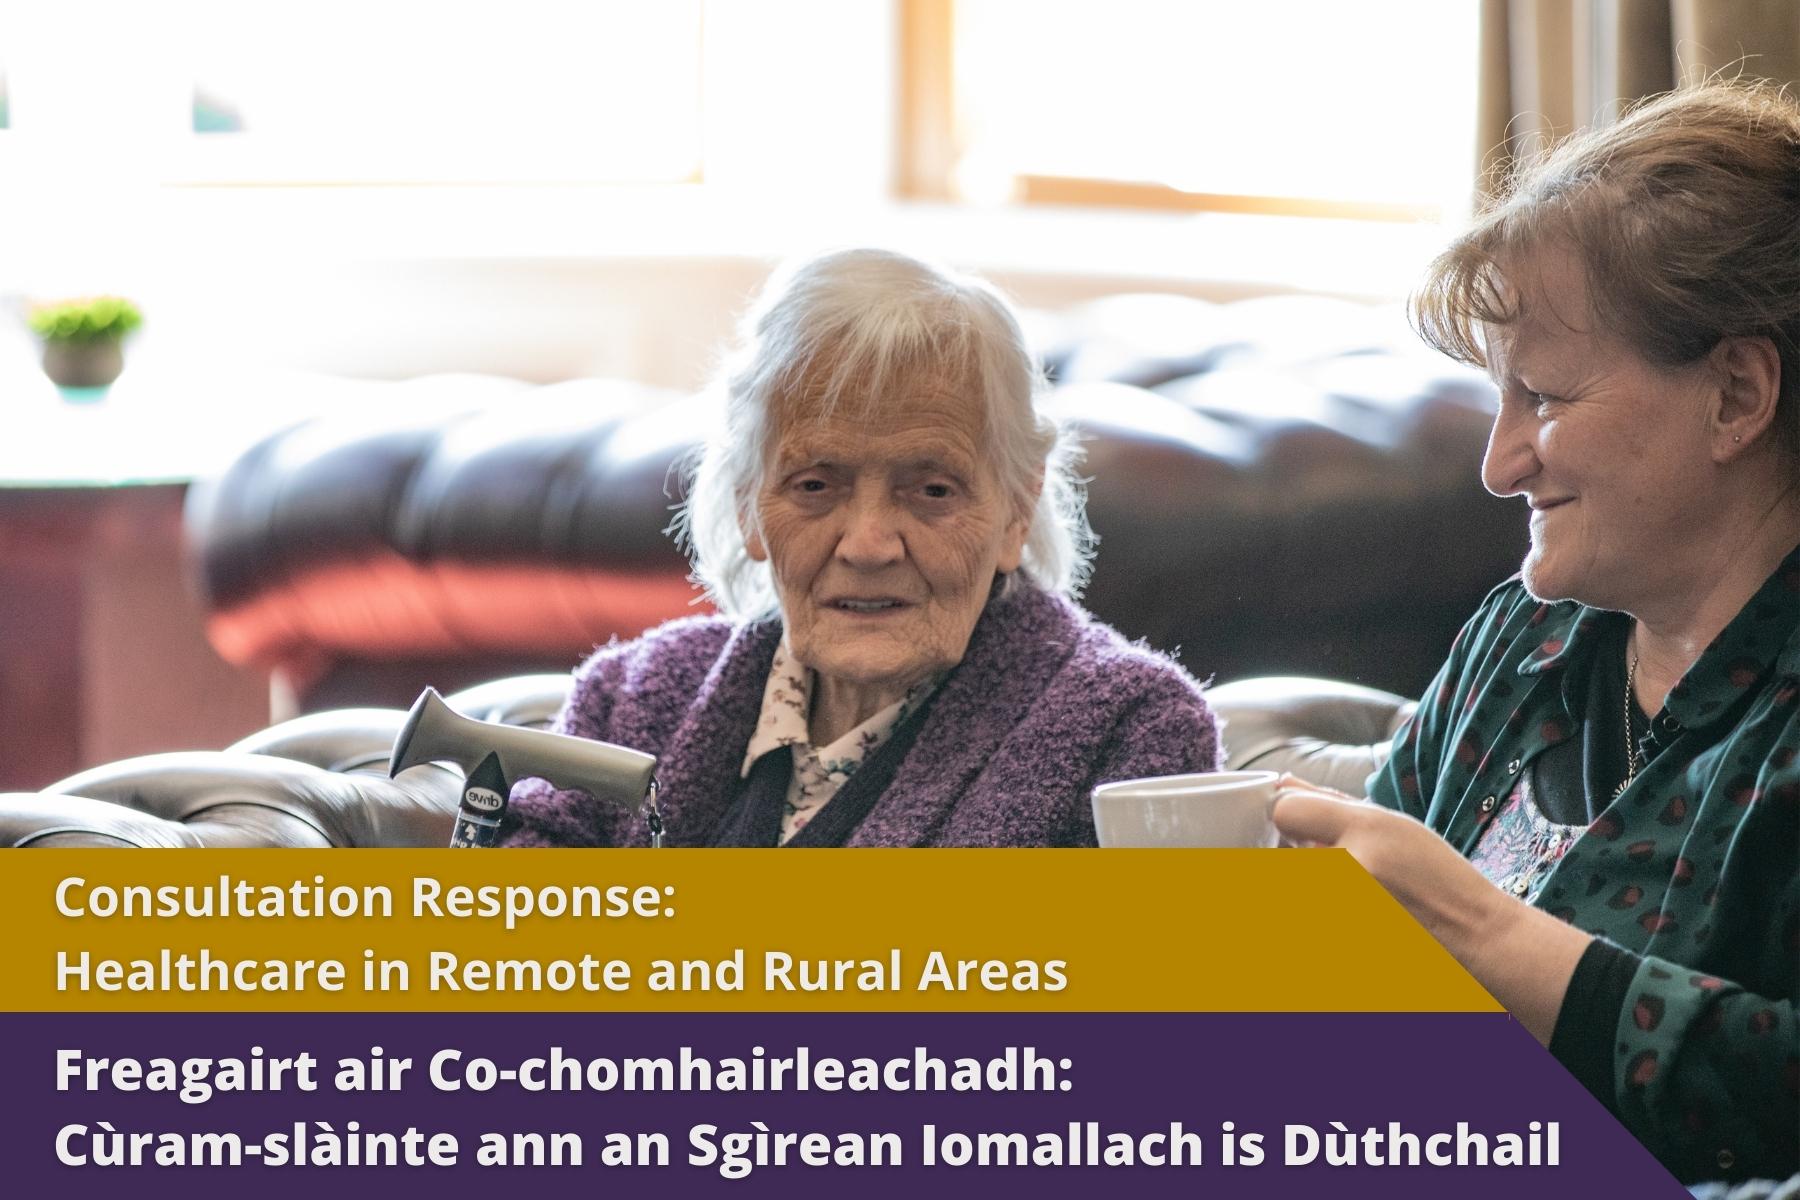 Picture: An elderly lady holding a walking stick sitting with a younger lady with text over picture. Text reads 'Consultation Response: Healthcare in Remote and Rural Areas'